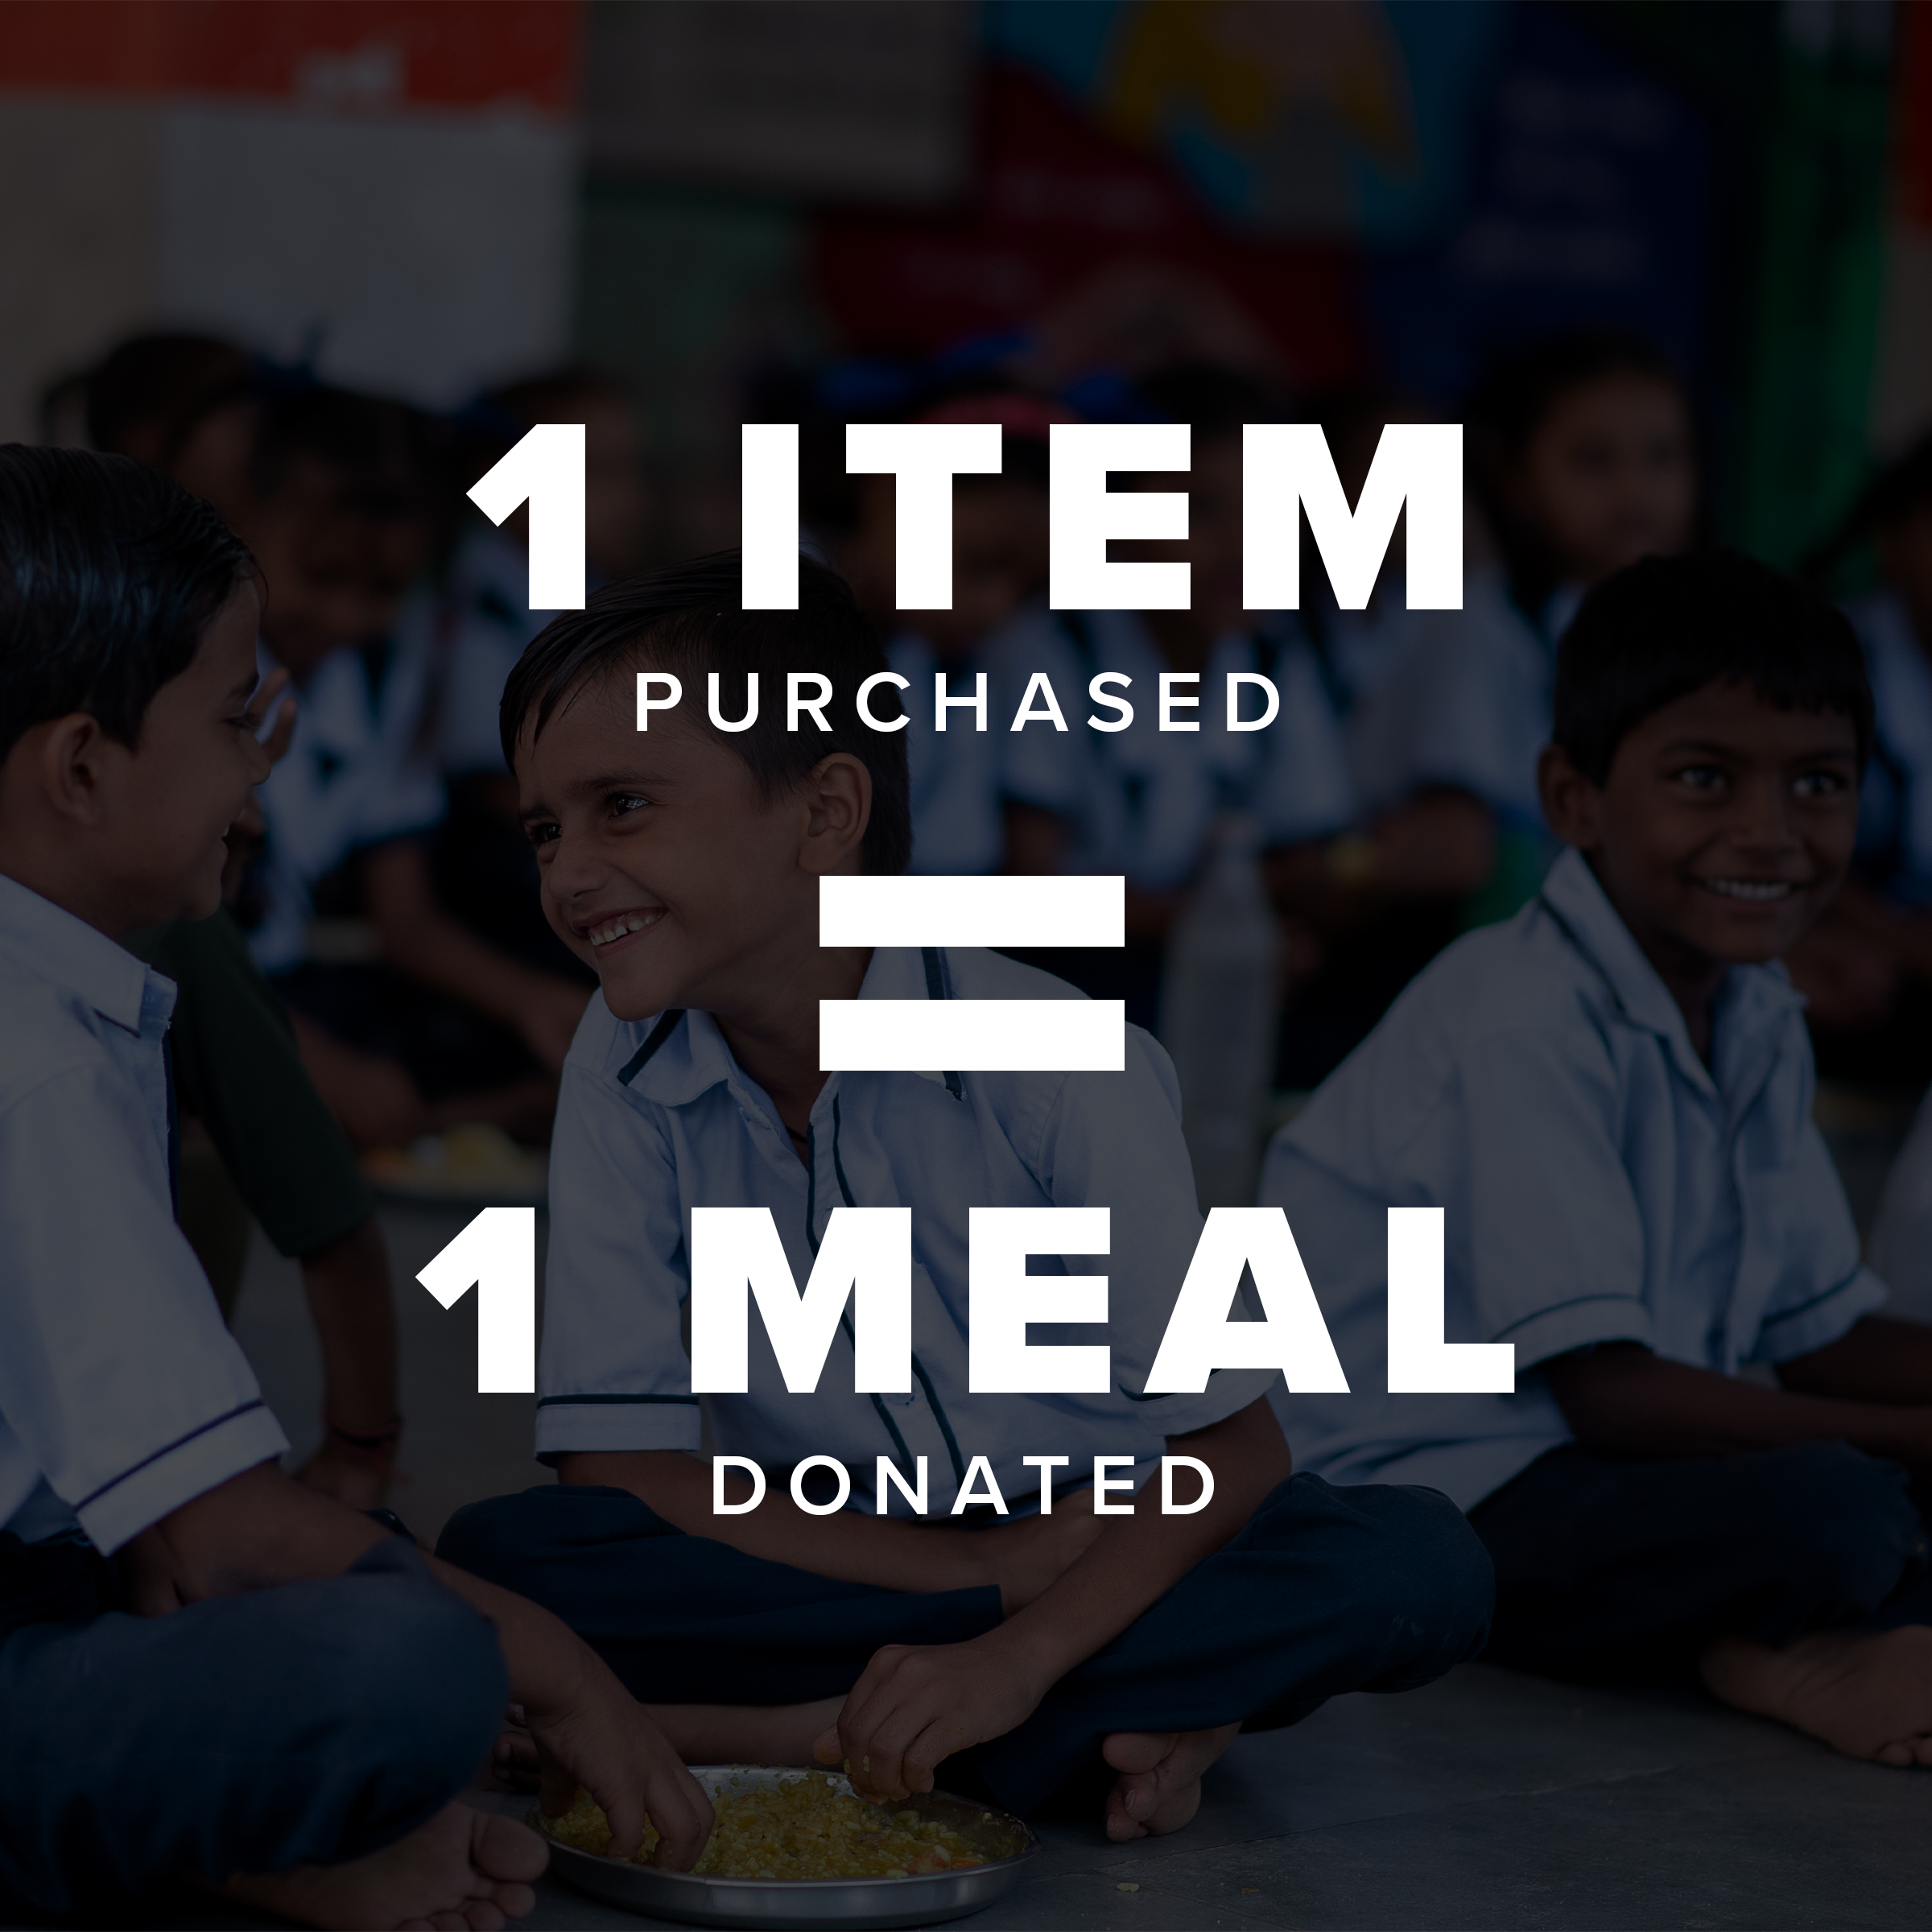 1 item purchased = 1 meal donated